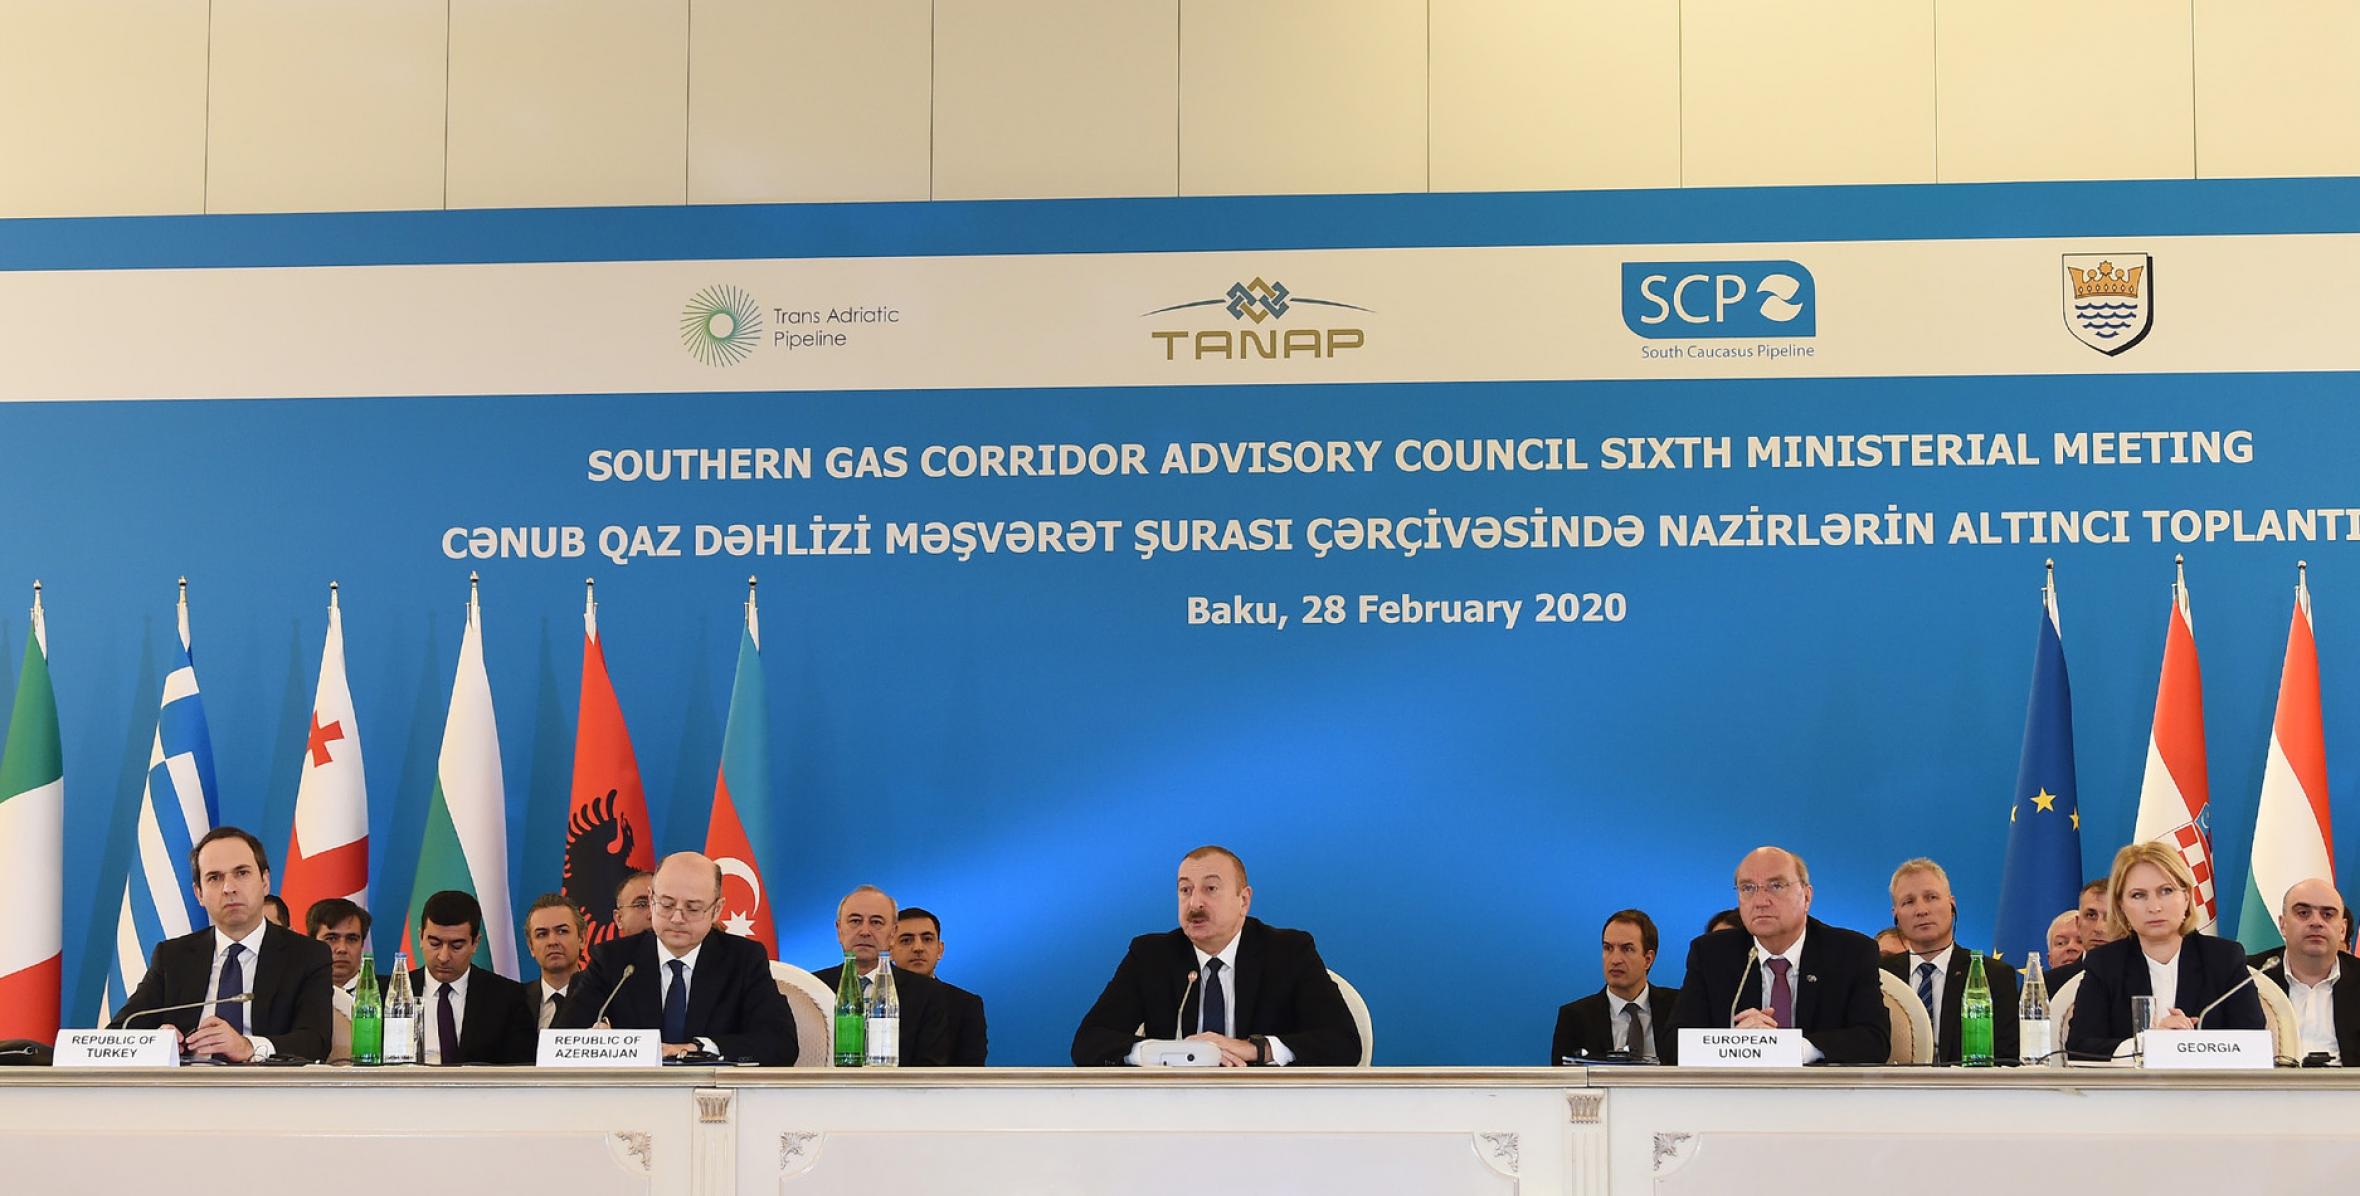 Speech by Ilham Aliyev at the 6th Ministerial Meeting of Southern Gas Corridor Advisory Council